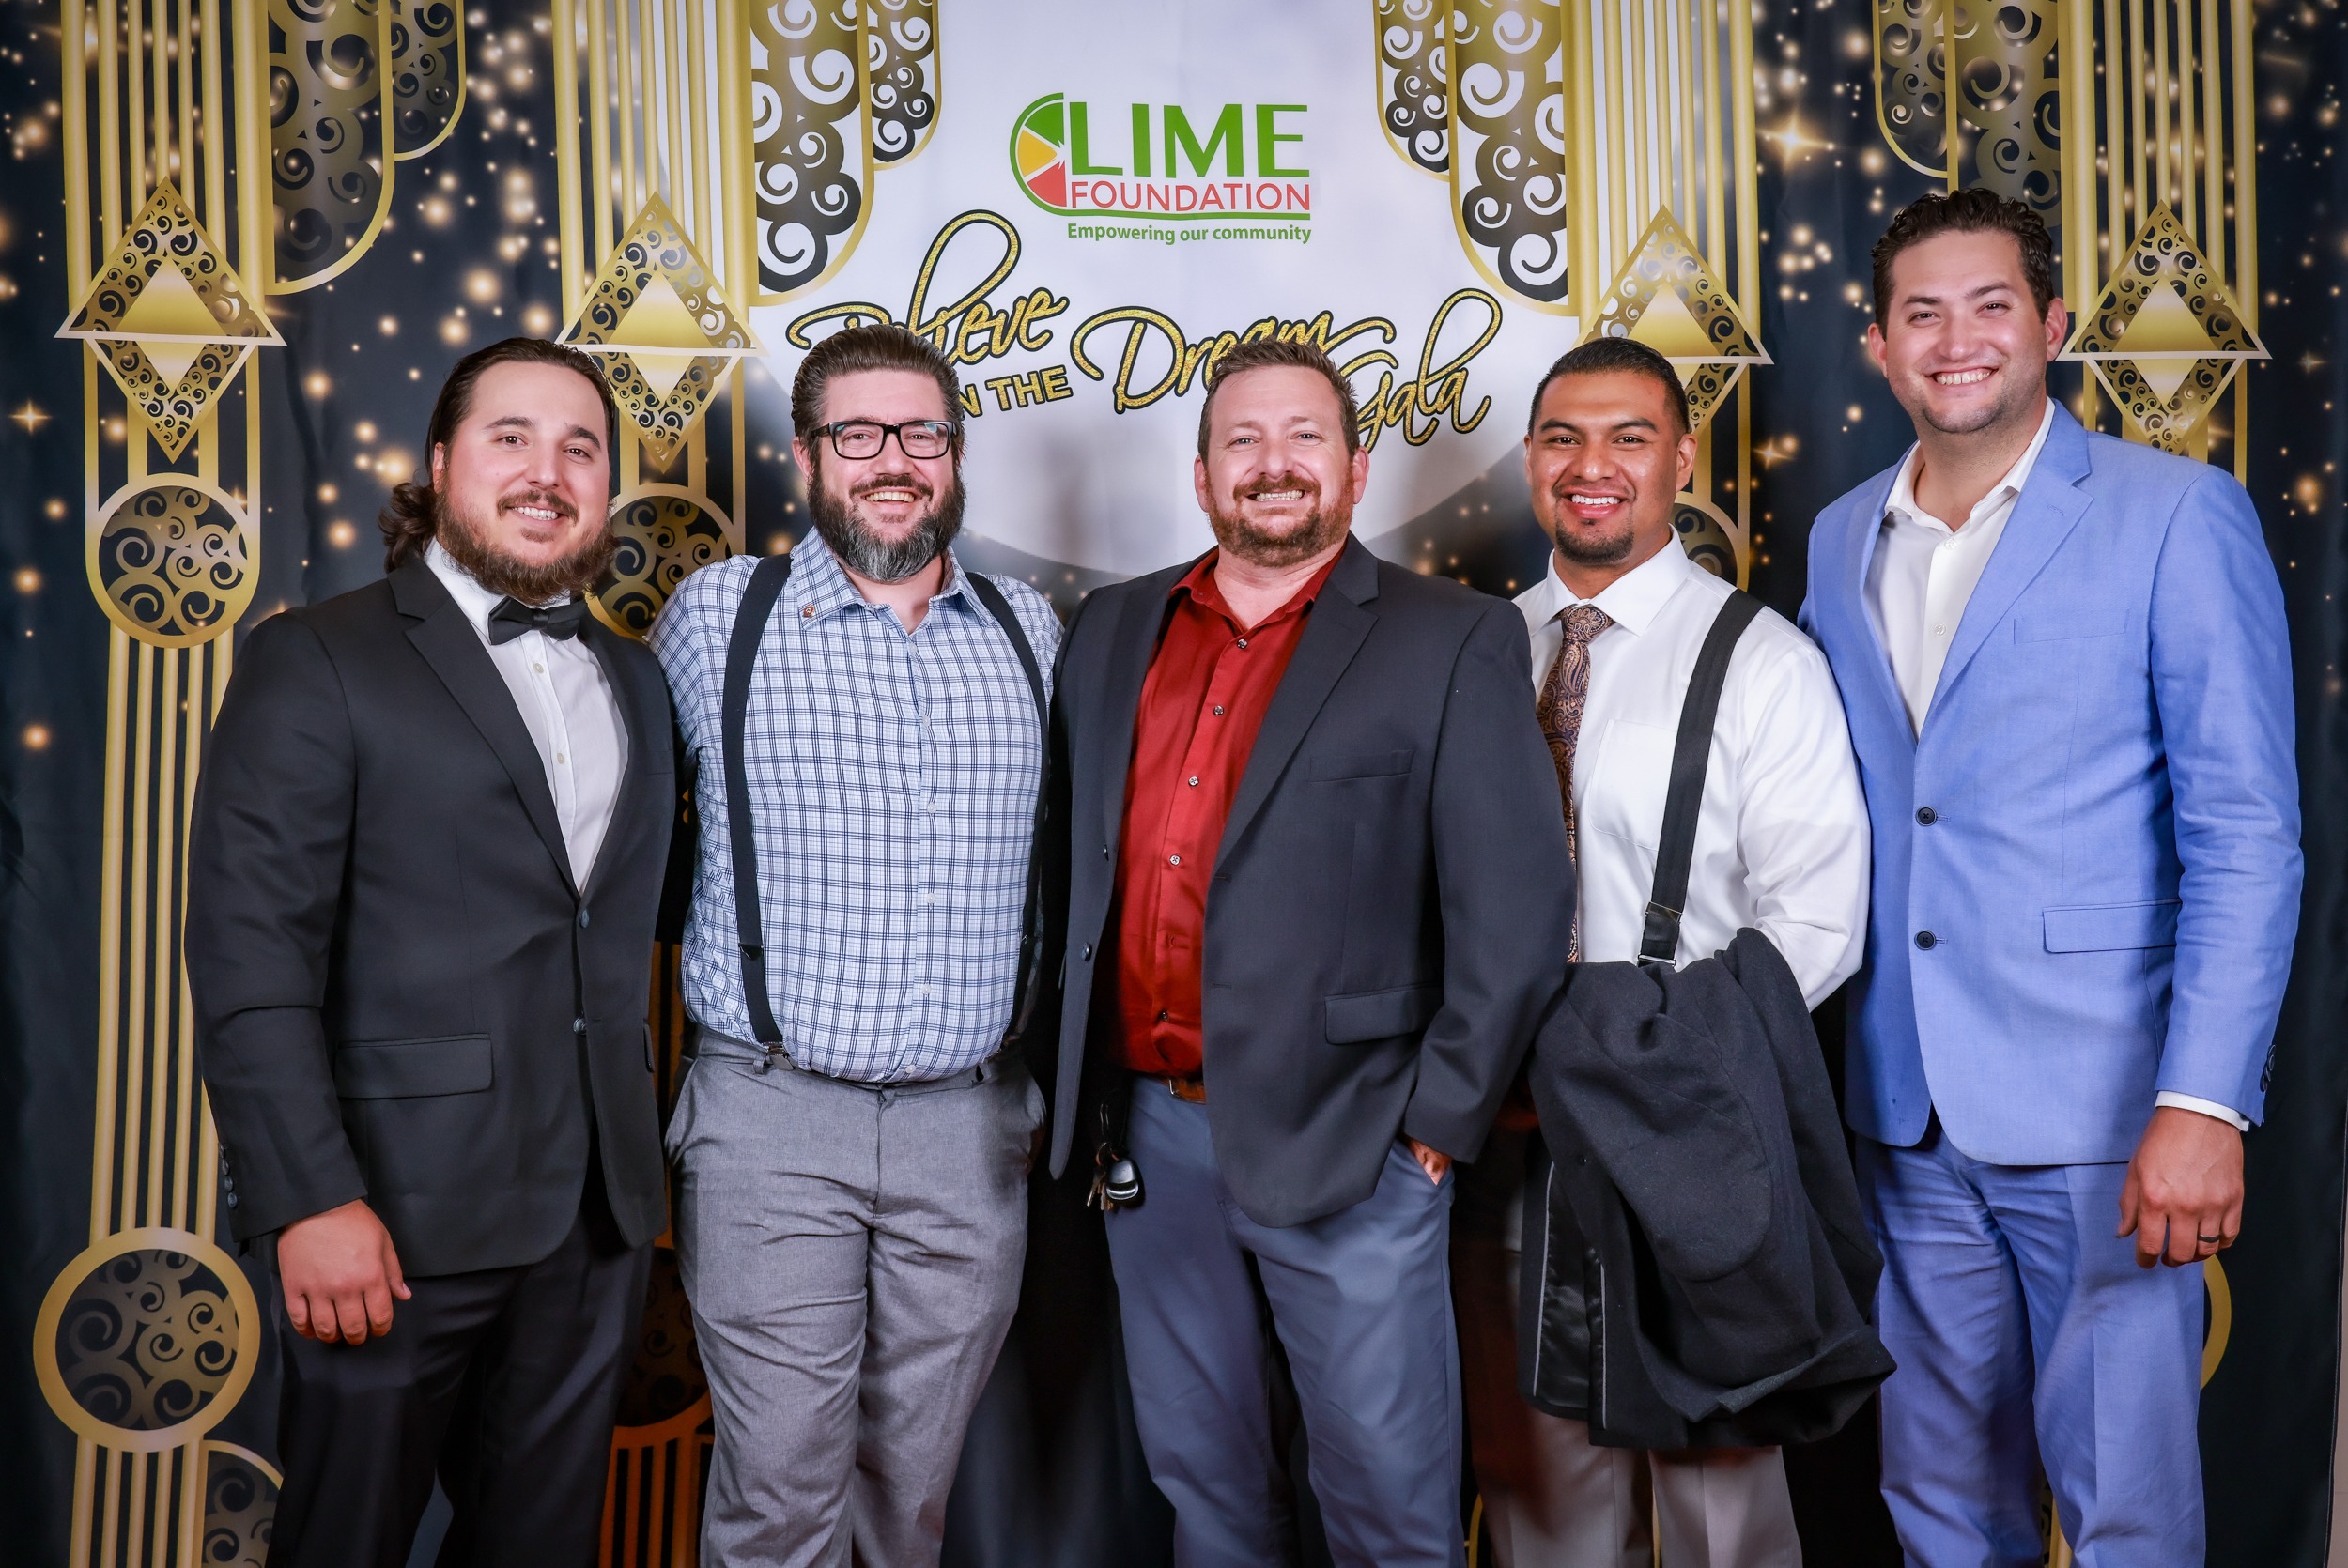 A group of men posing for a photo at The LIME Foundation's event in Santa Rosa.